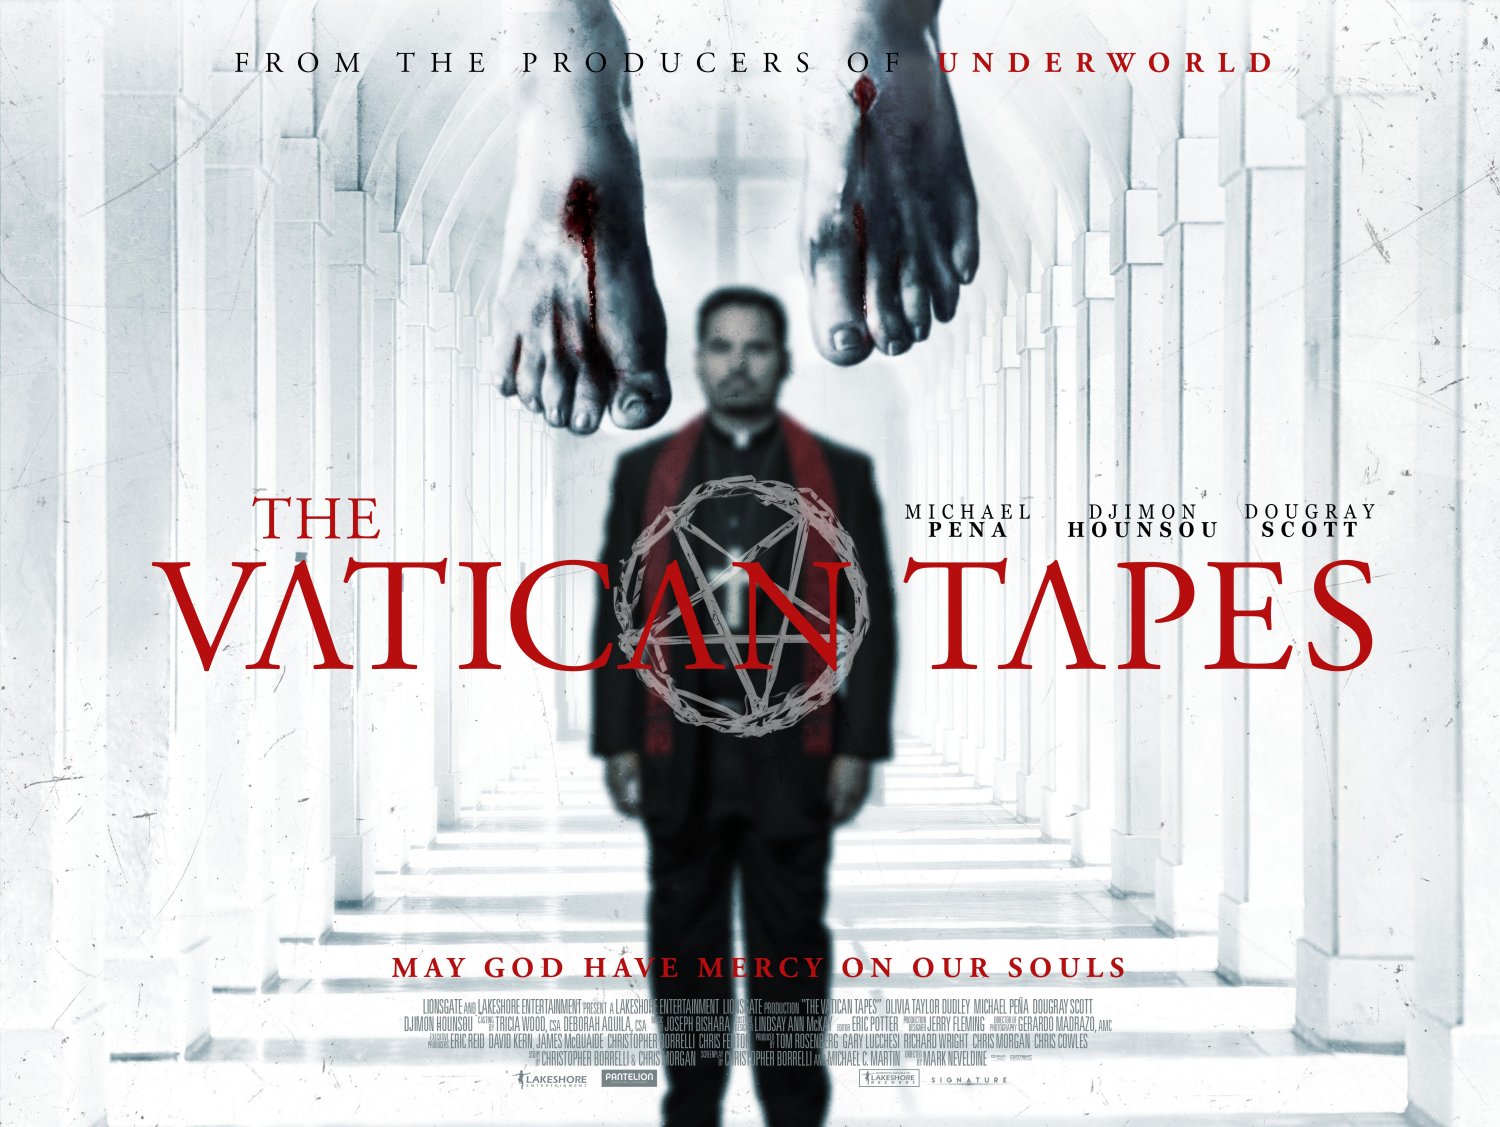 THE VATICAN TAPES – UK POSTER